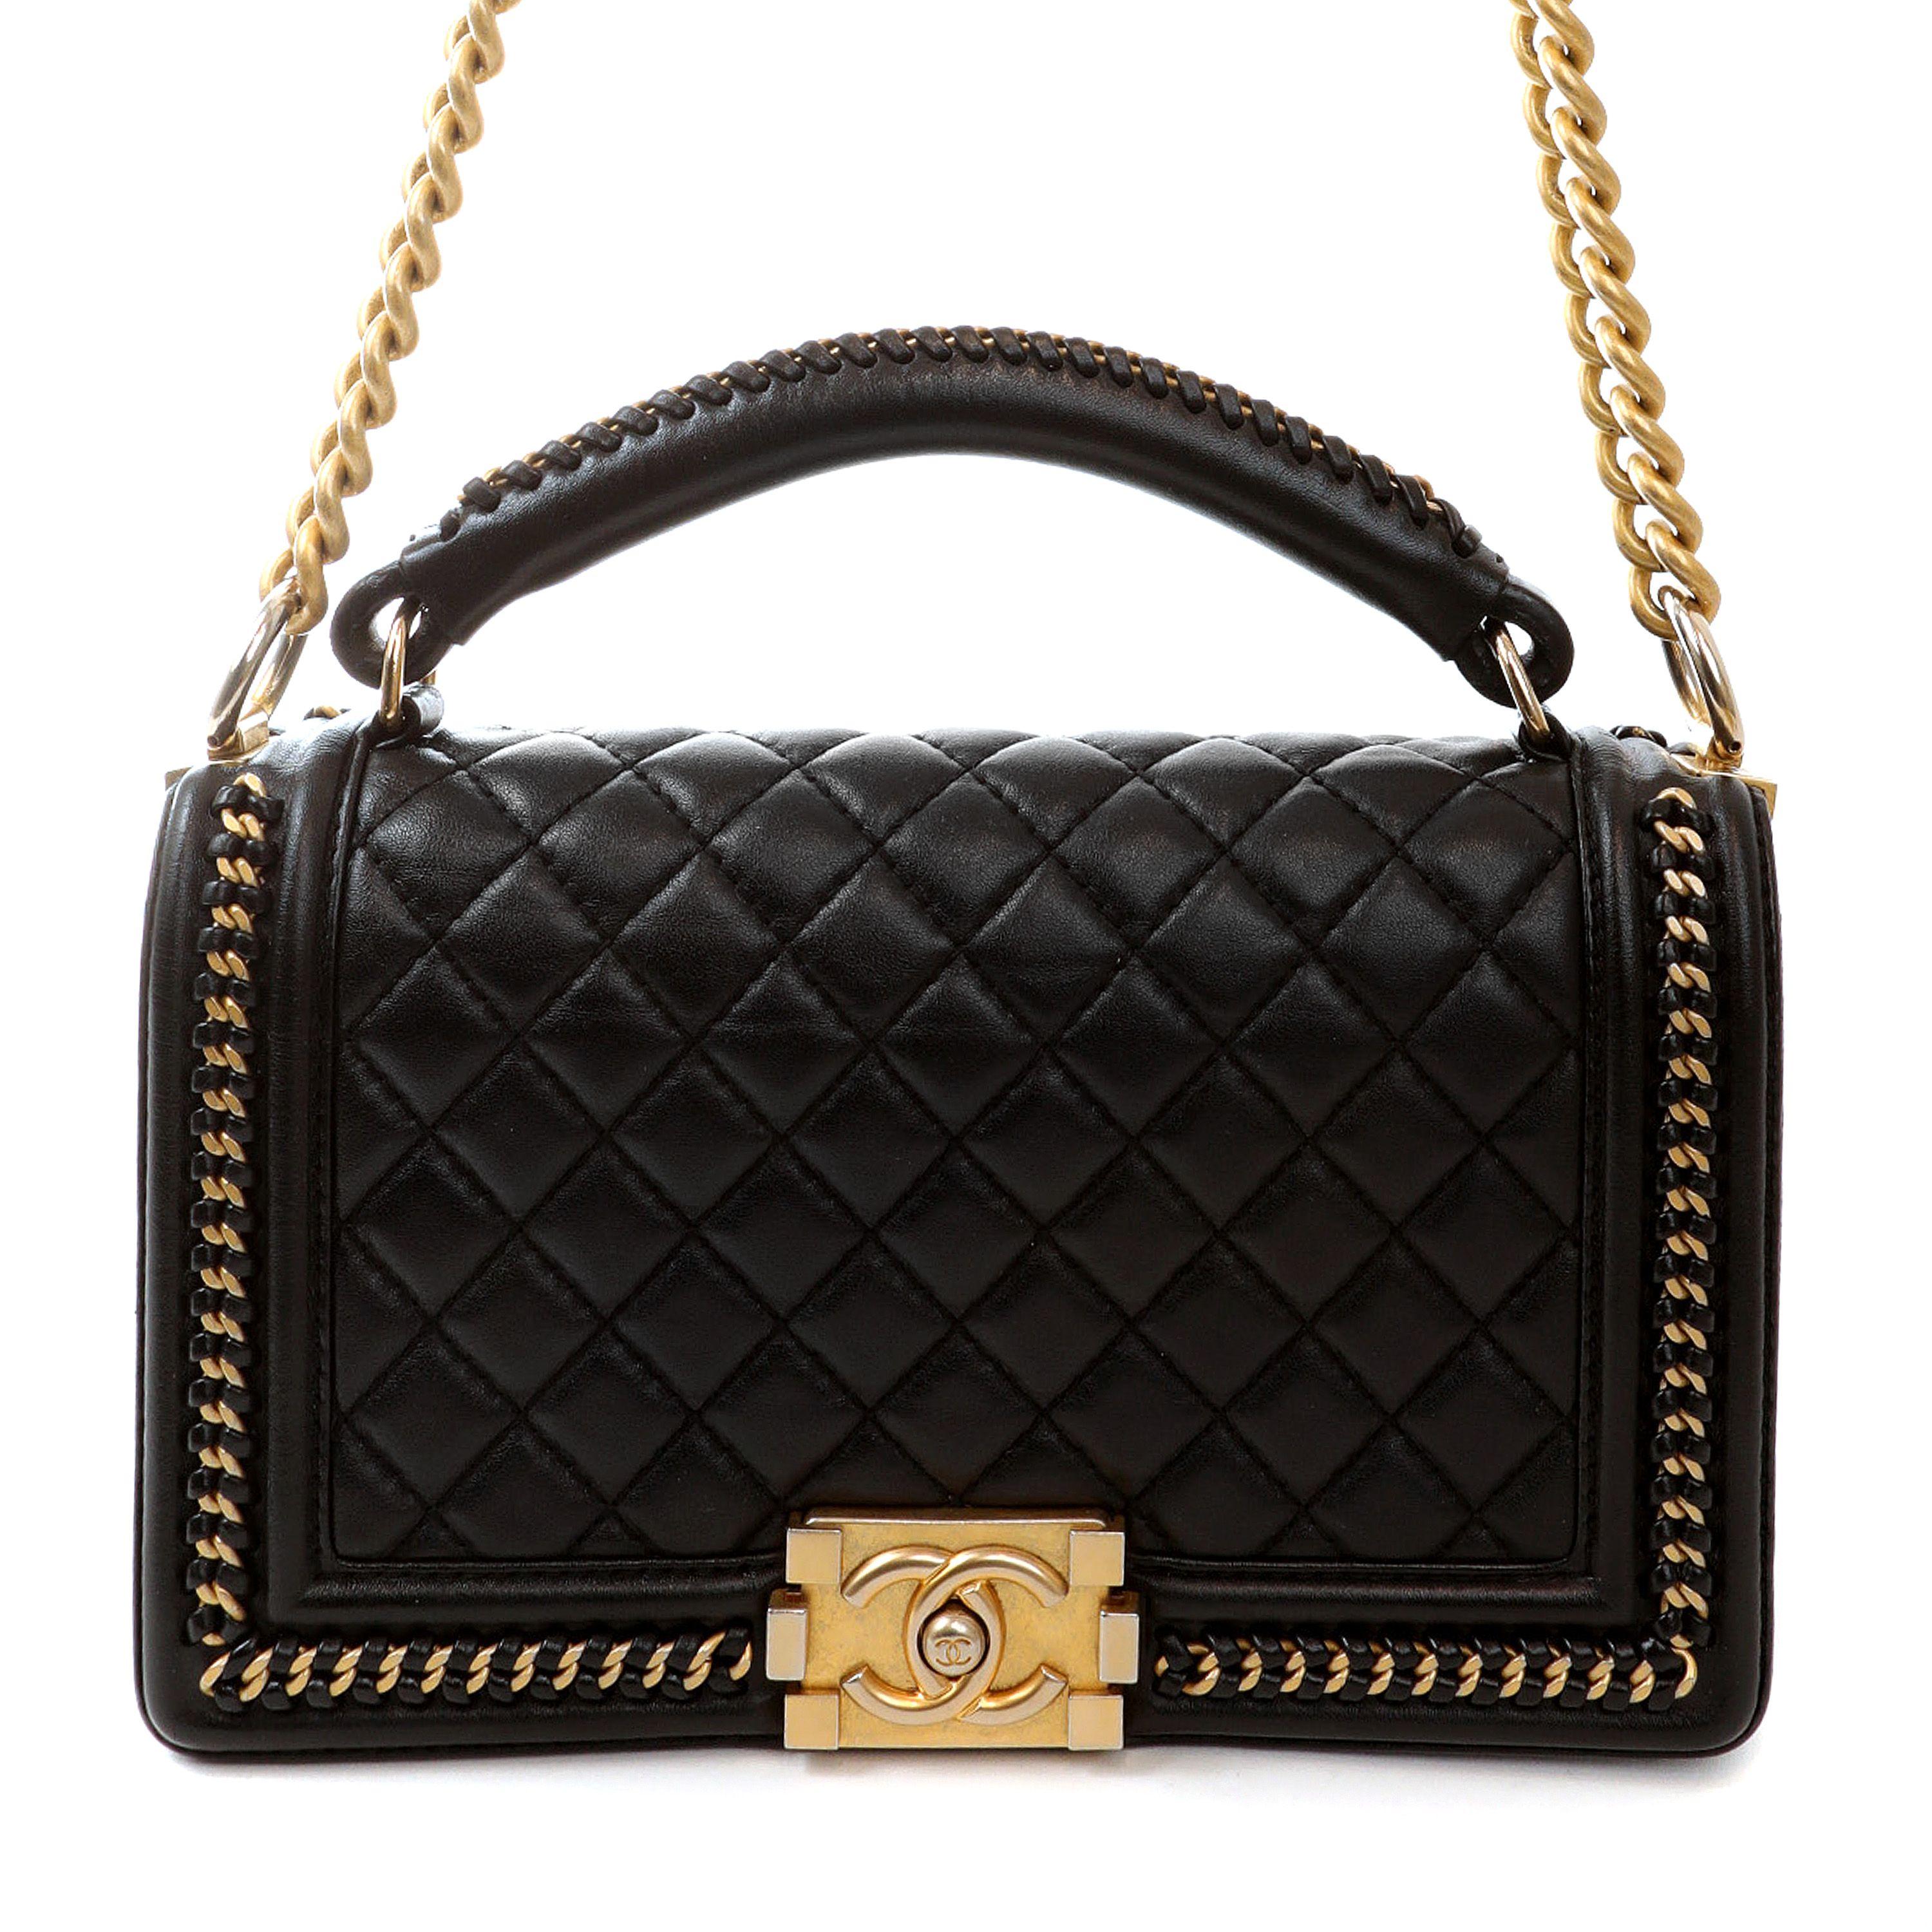 Chanel Black Lambskin Medium Chain Around Boy Bag with Gold Hardware In Good Condition For Sale In Palm Beach, FL